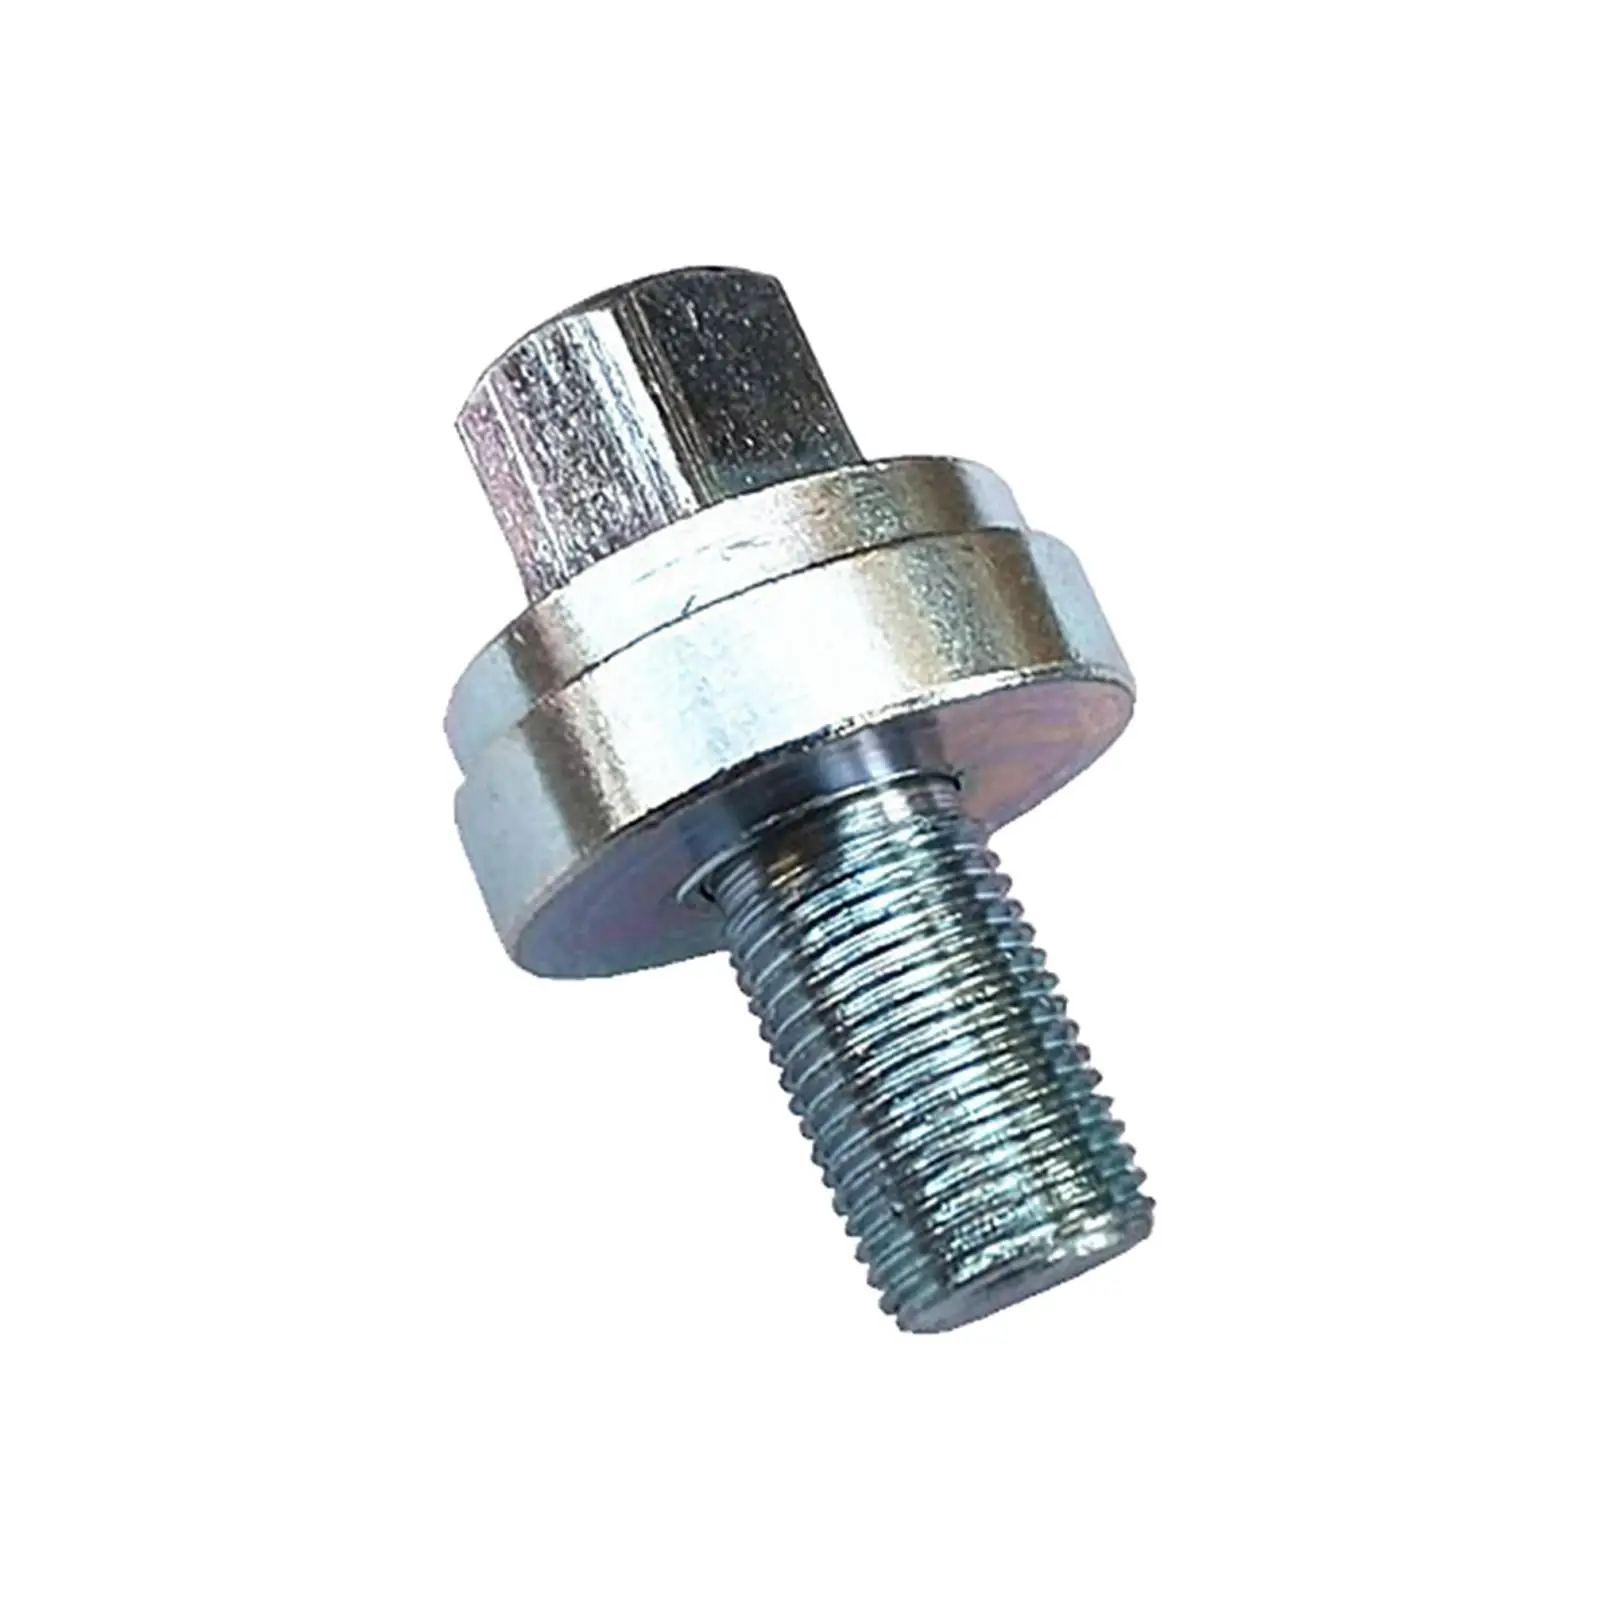 Crankshaft Pulley Bolt 90017P01003 Professional Durable replacements for Honda Civic Easily Install Vehicle Repair Parts